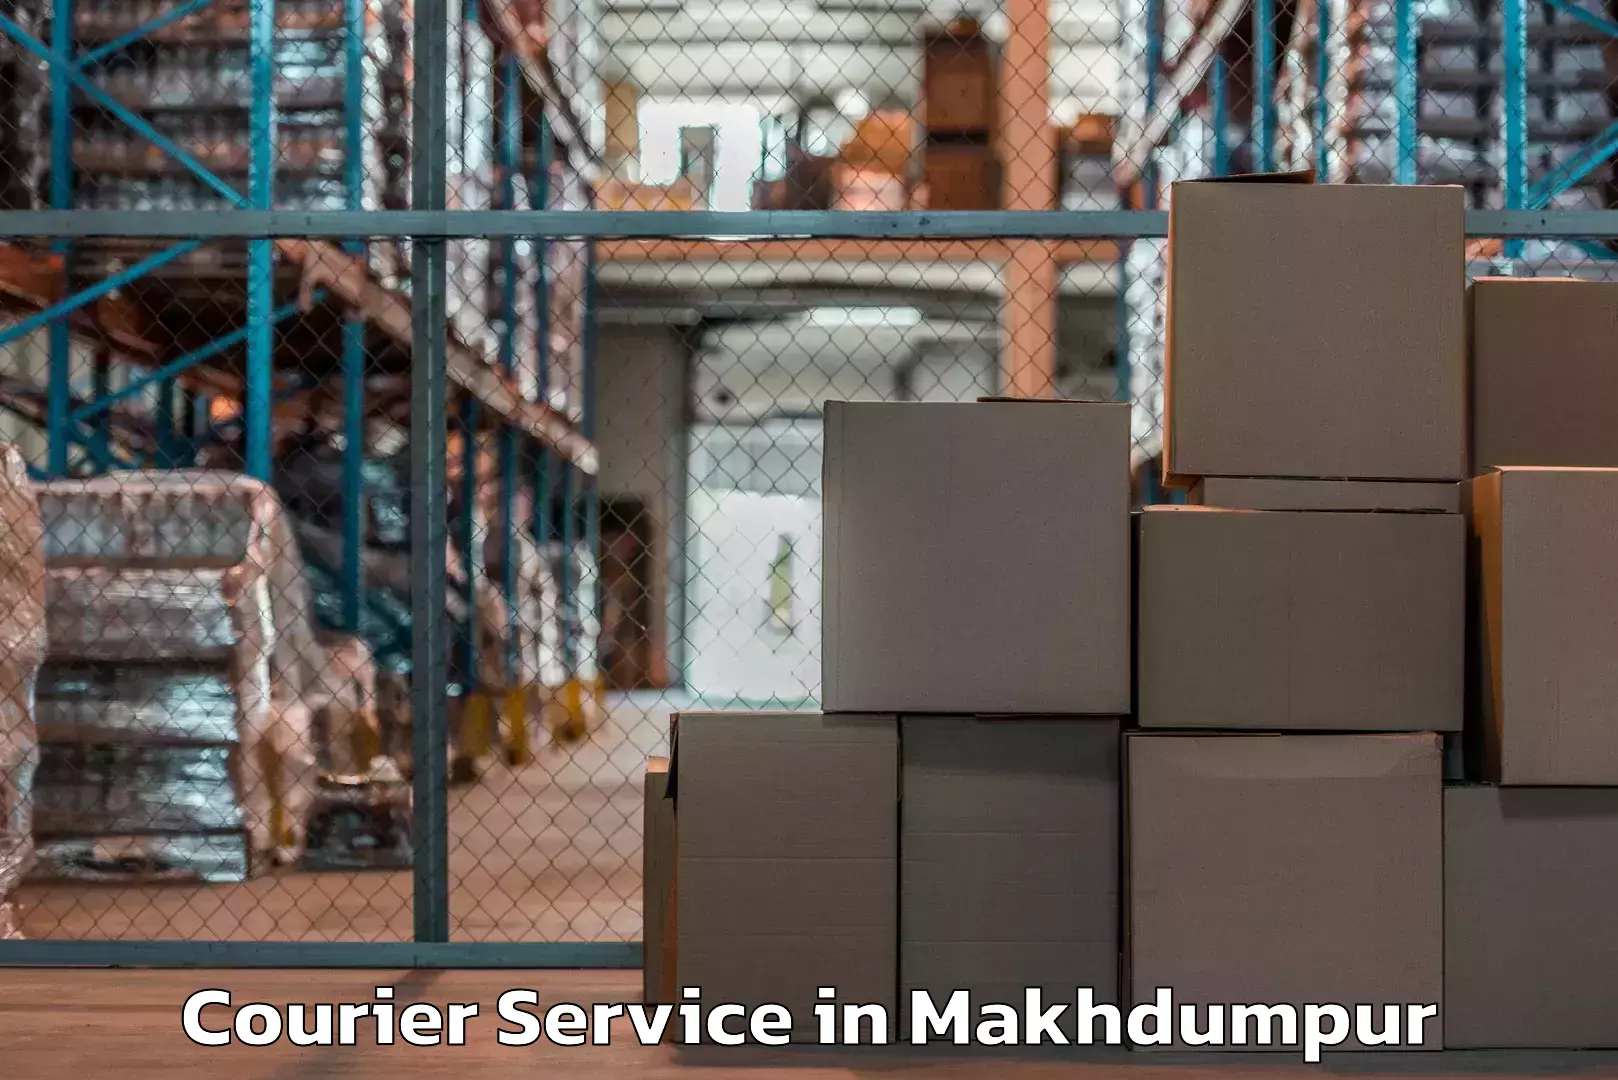 Tech-enabled shipping in Makhdumpur